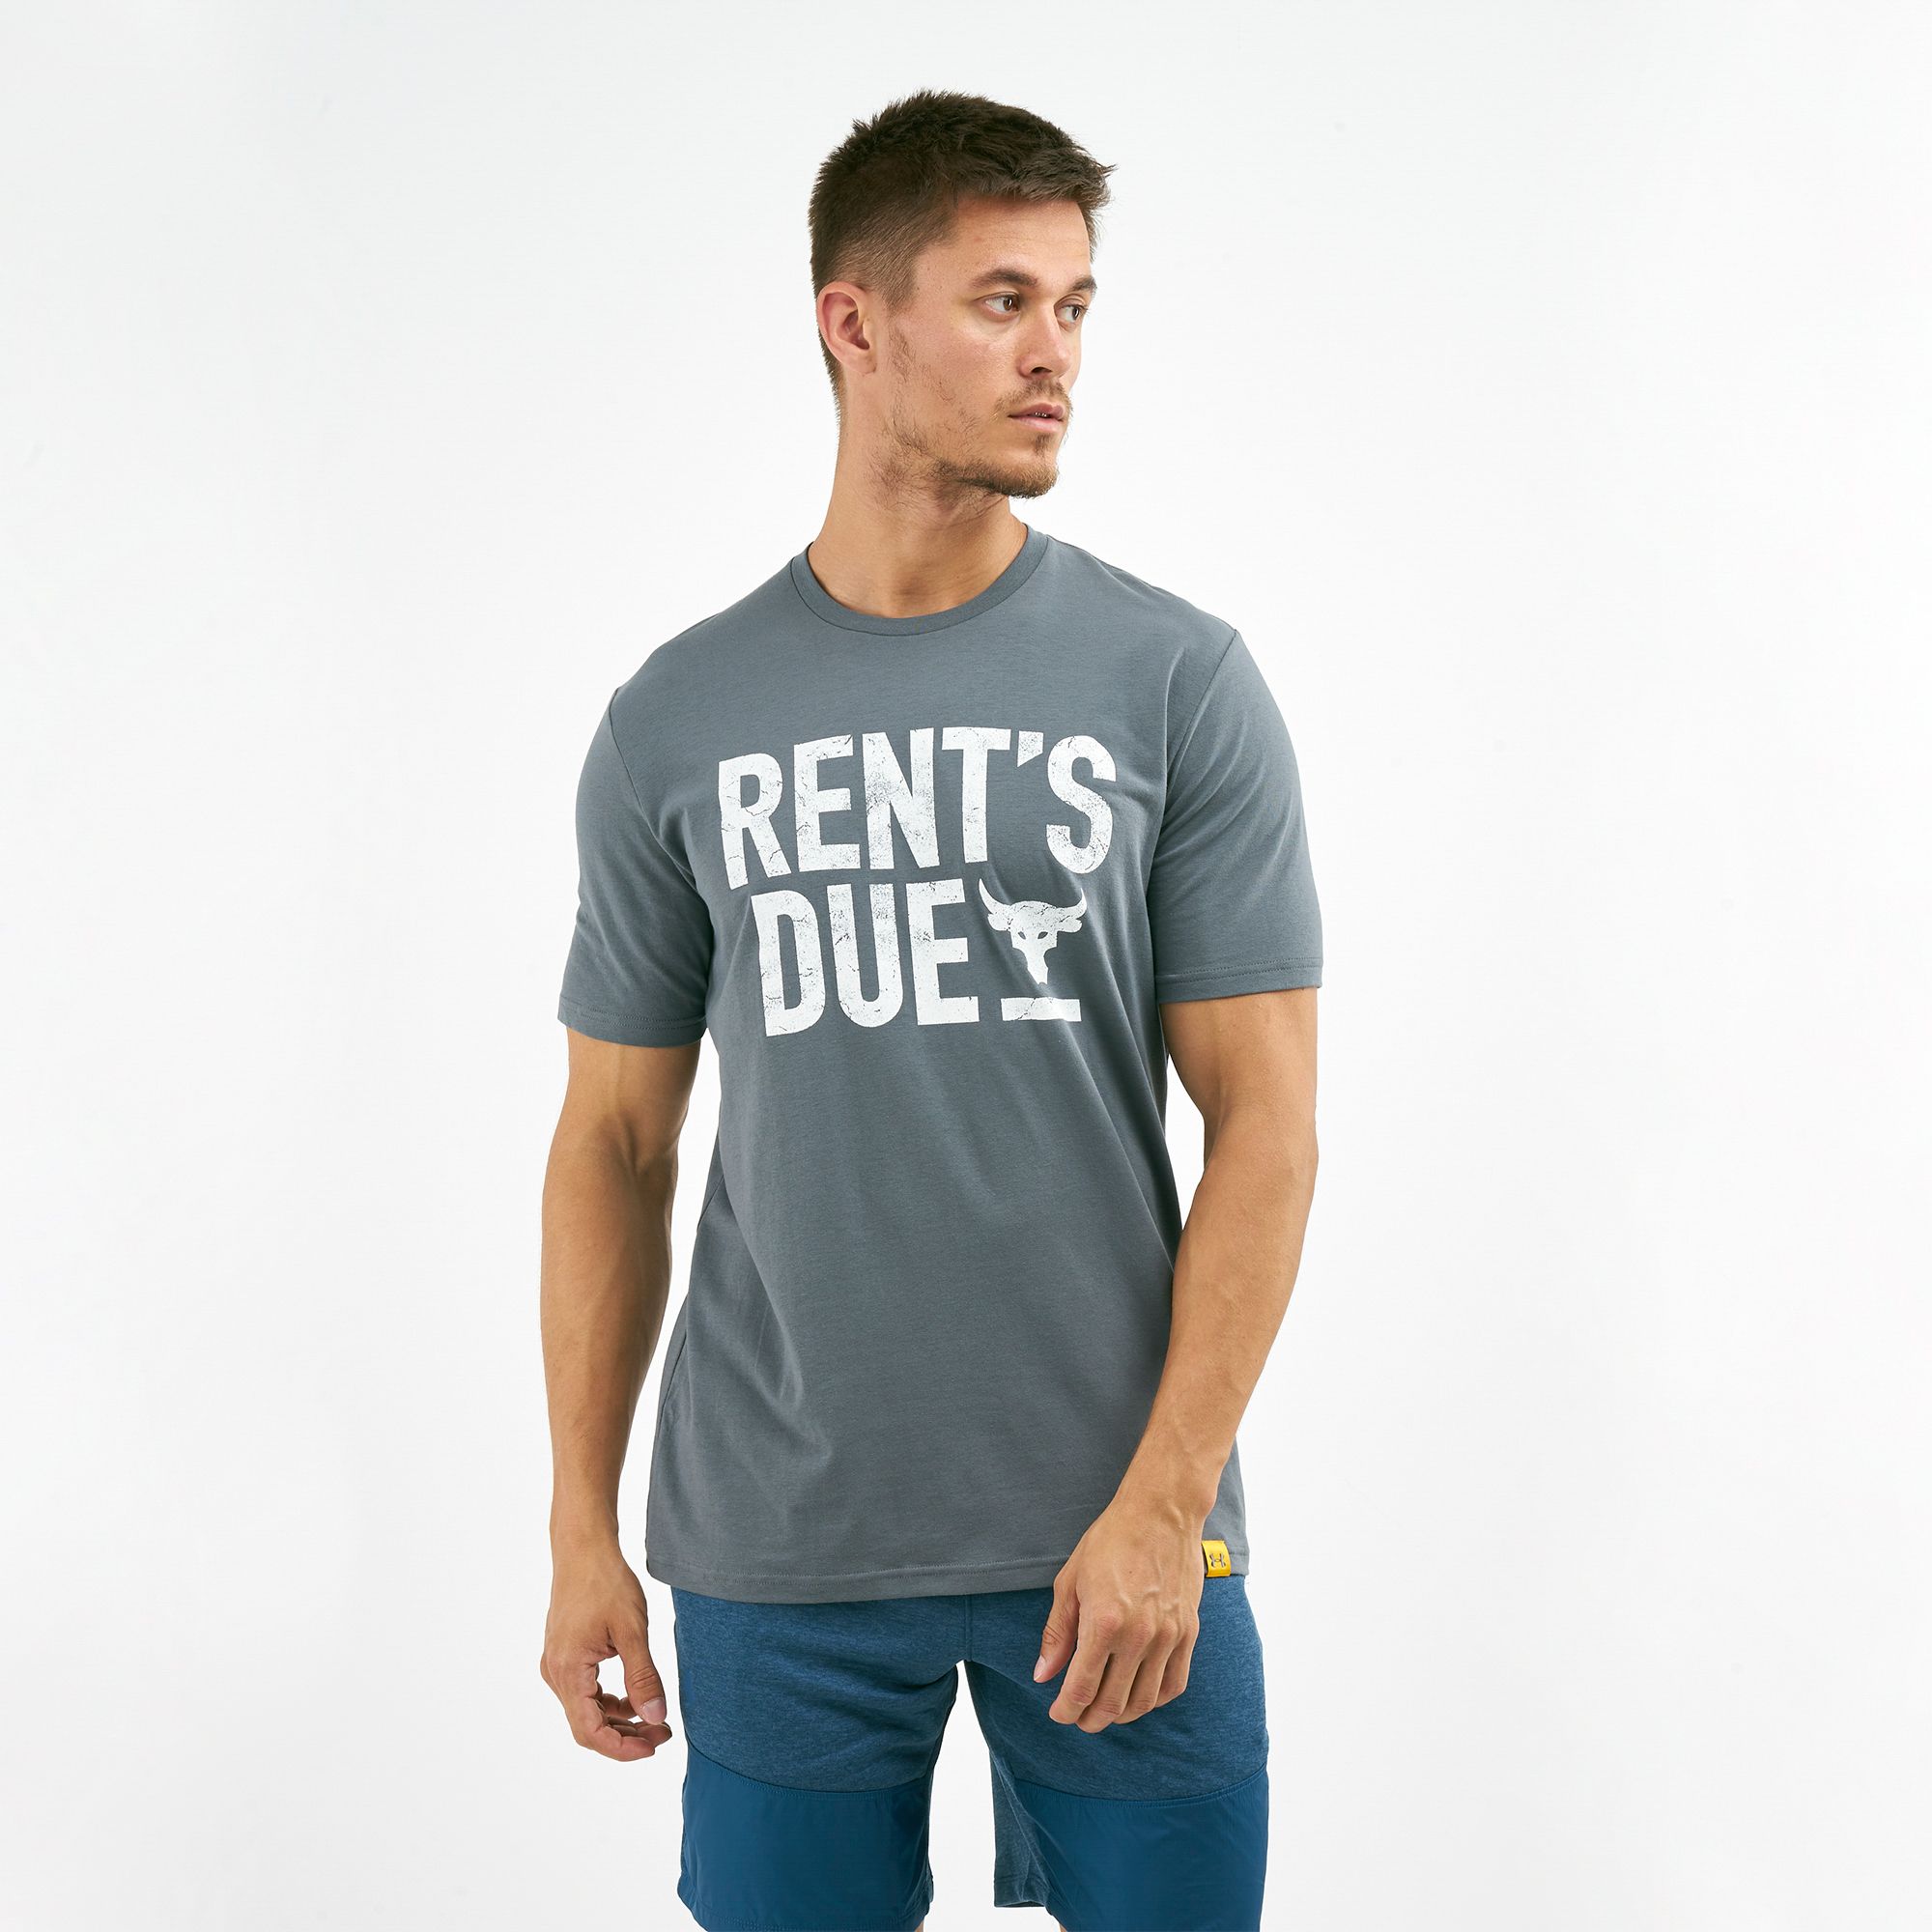 under armour rent is due